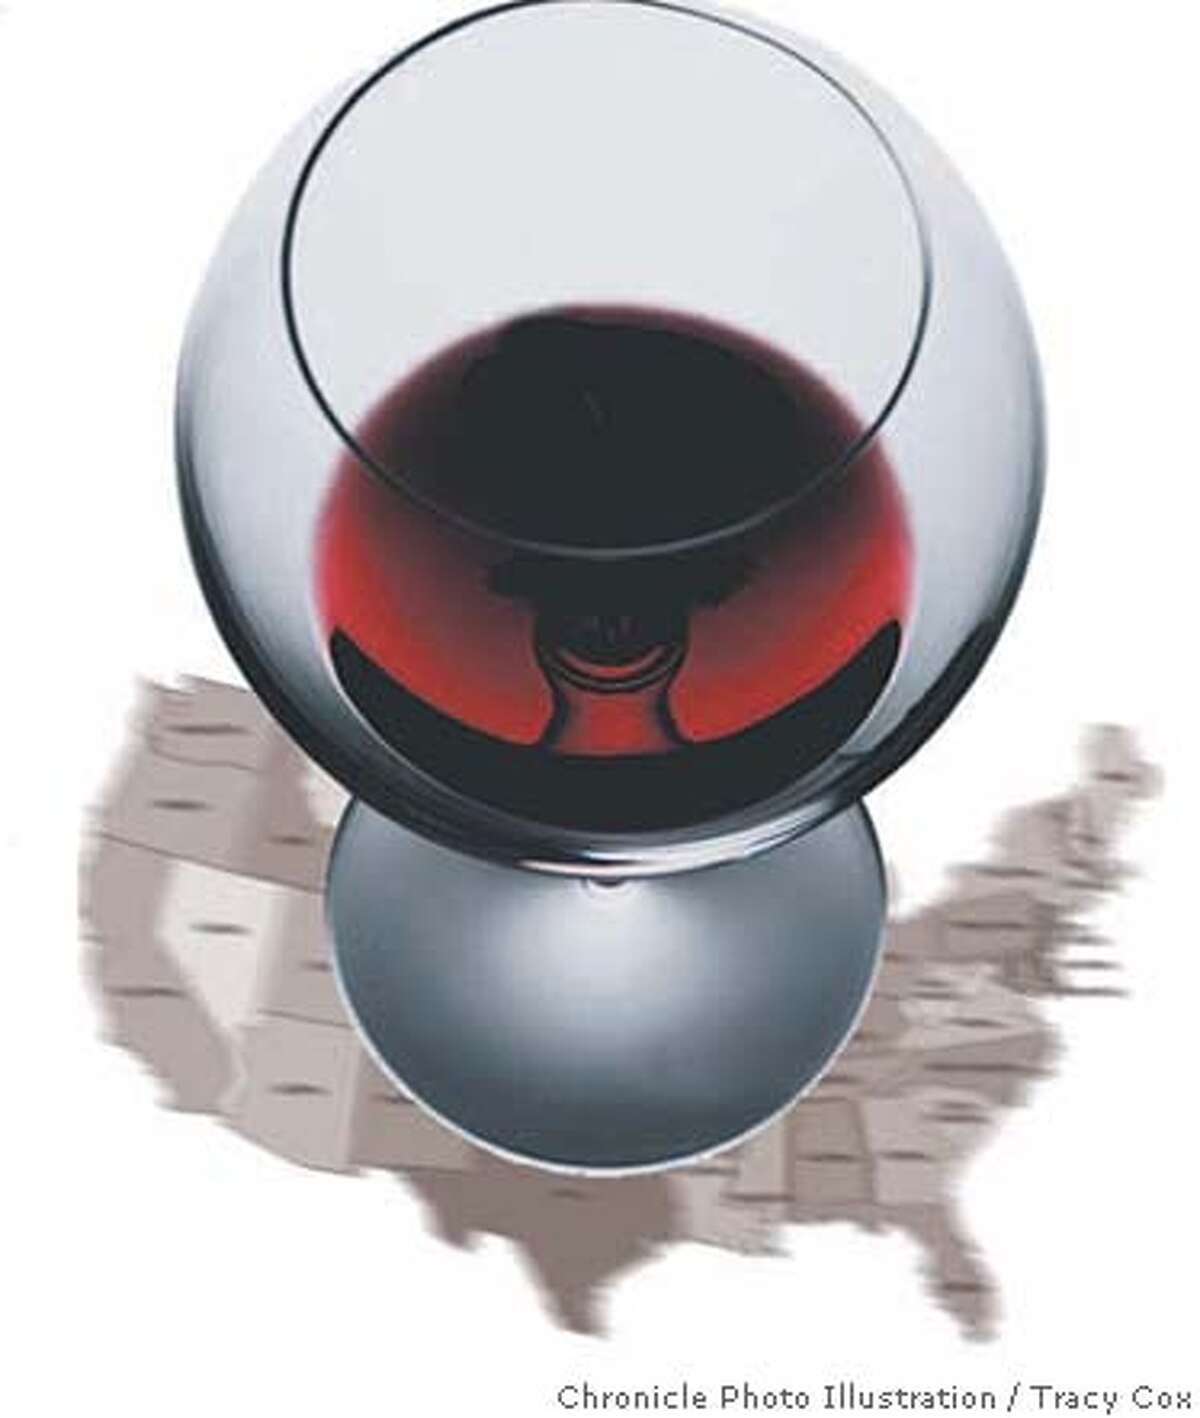 For nation's vintners, days of wine are rosy: $162 billion industry now in all 50 states with 1.1 million jobs. Chronicle illustration by Tracy Cox